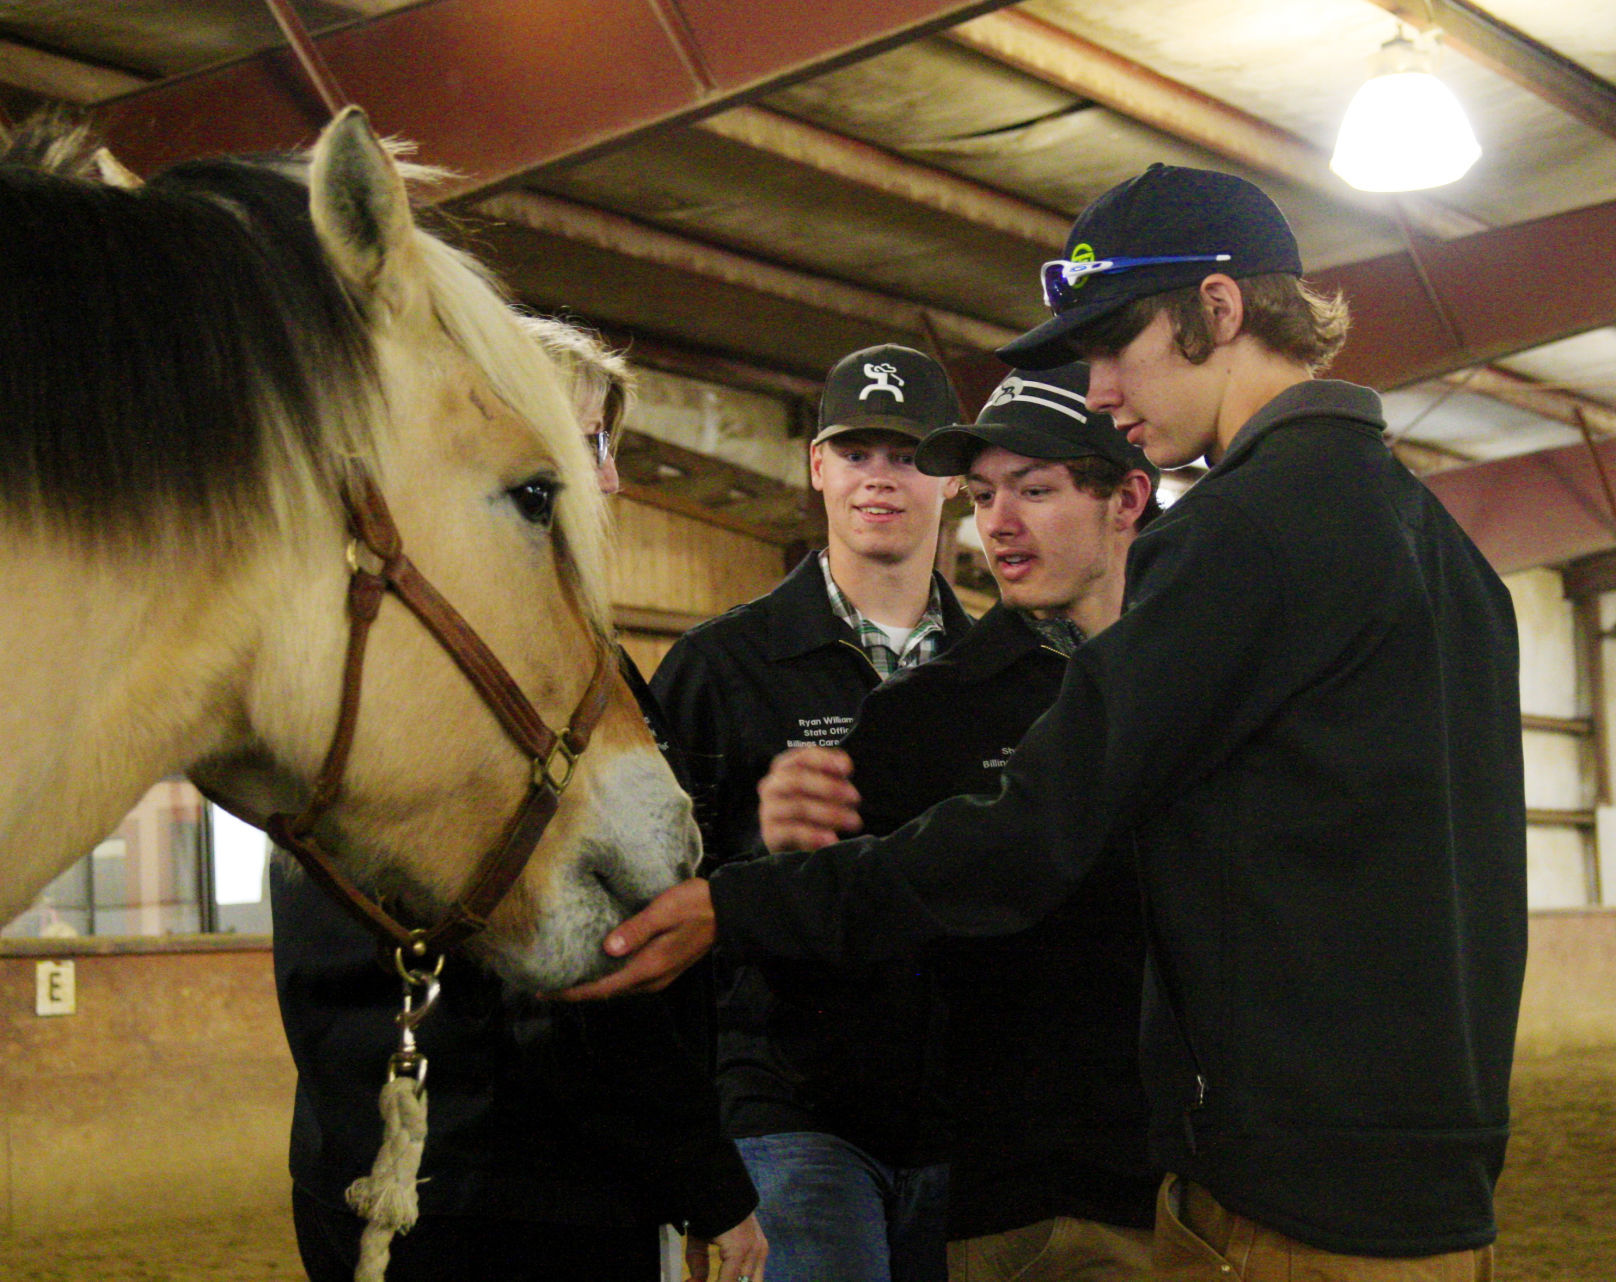 Veterans can now get a ride to equestrian therapy program with student donation